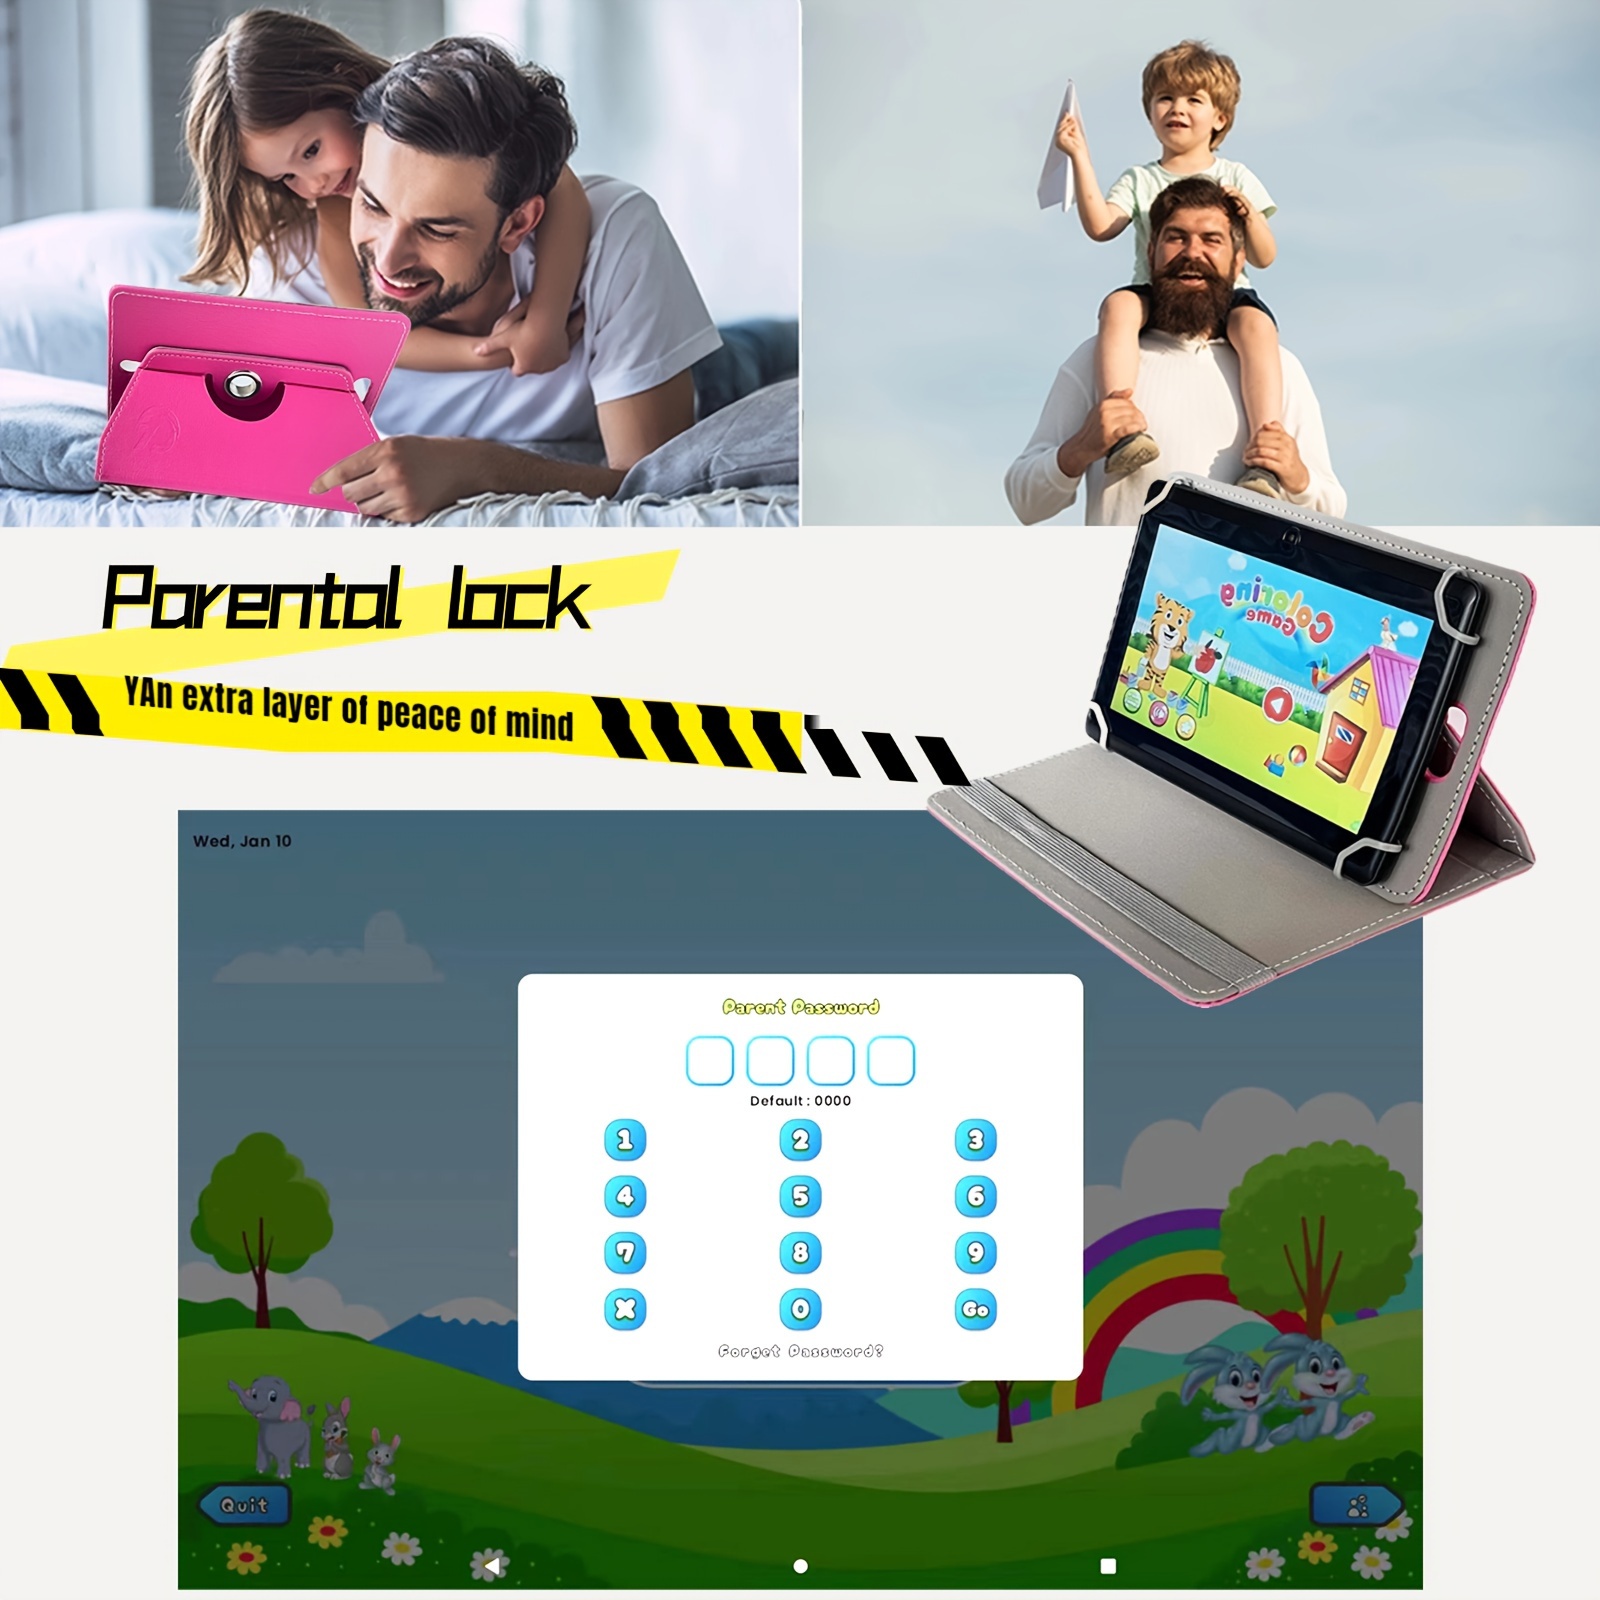 tablet study pad 7 inch educational toy preschool study 32grom safety contents eye protect hd screen 2camera parental lock g silicone protect montessori education toy usb supply